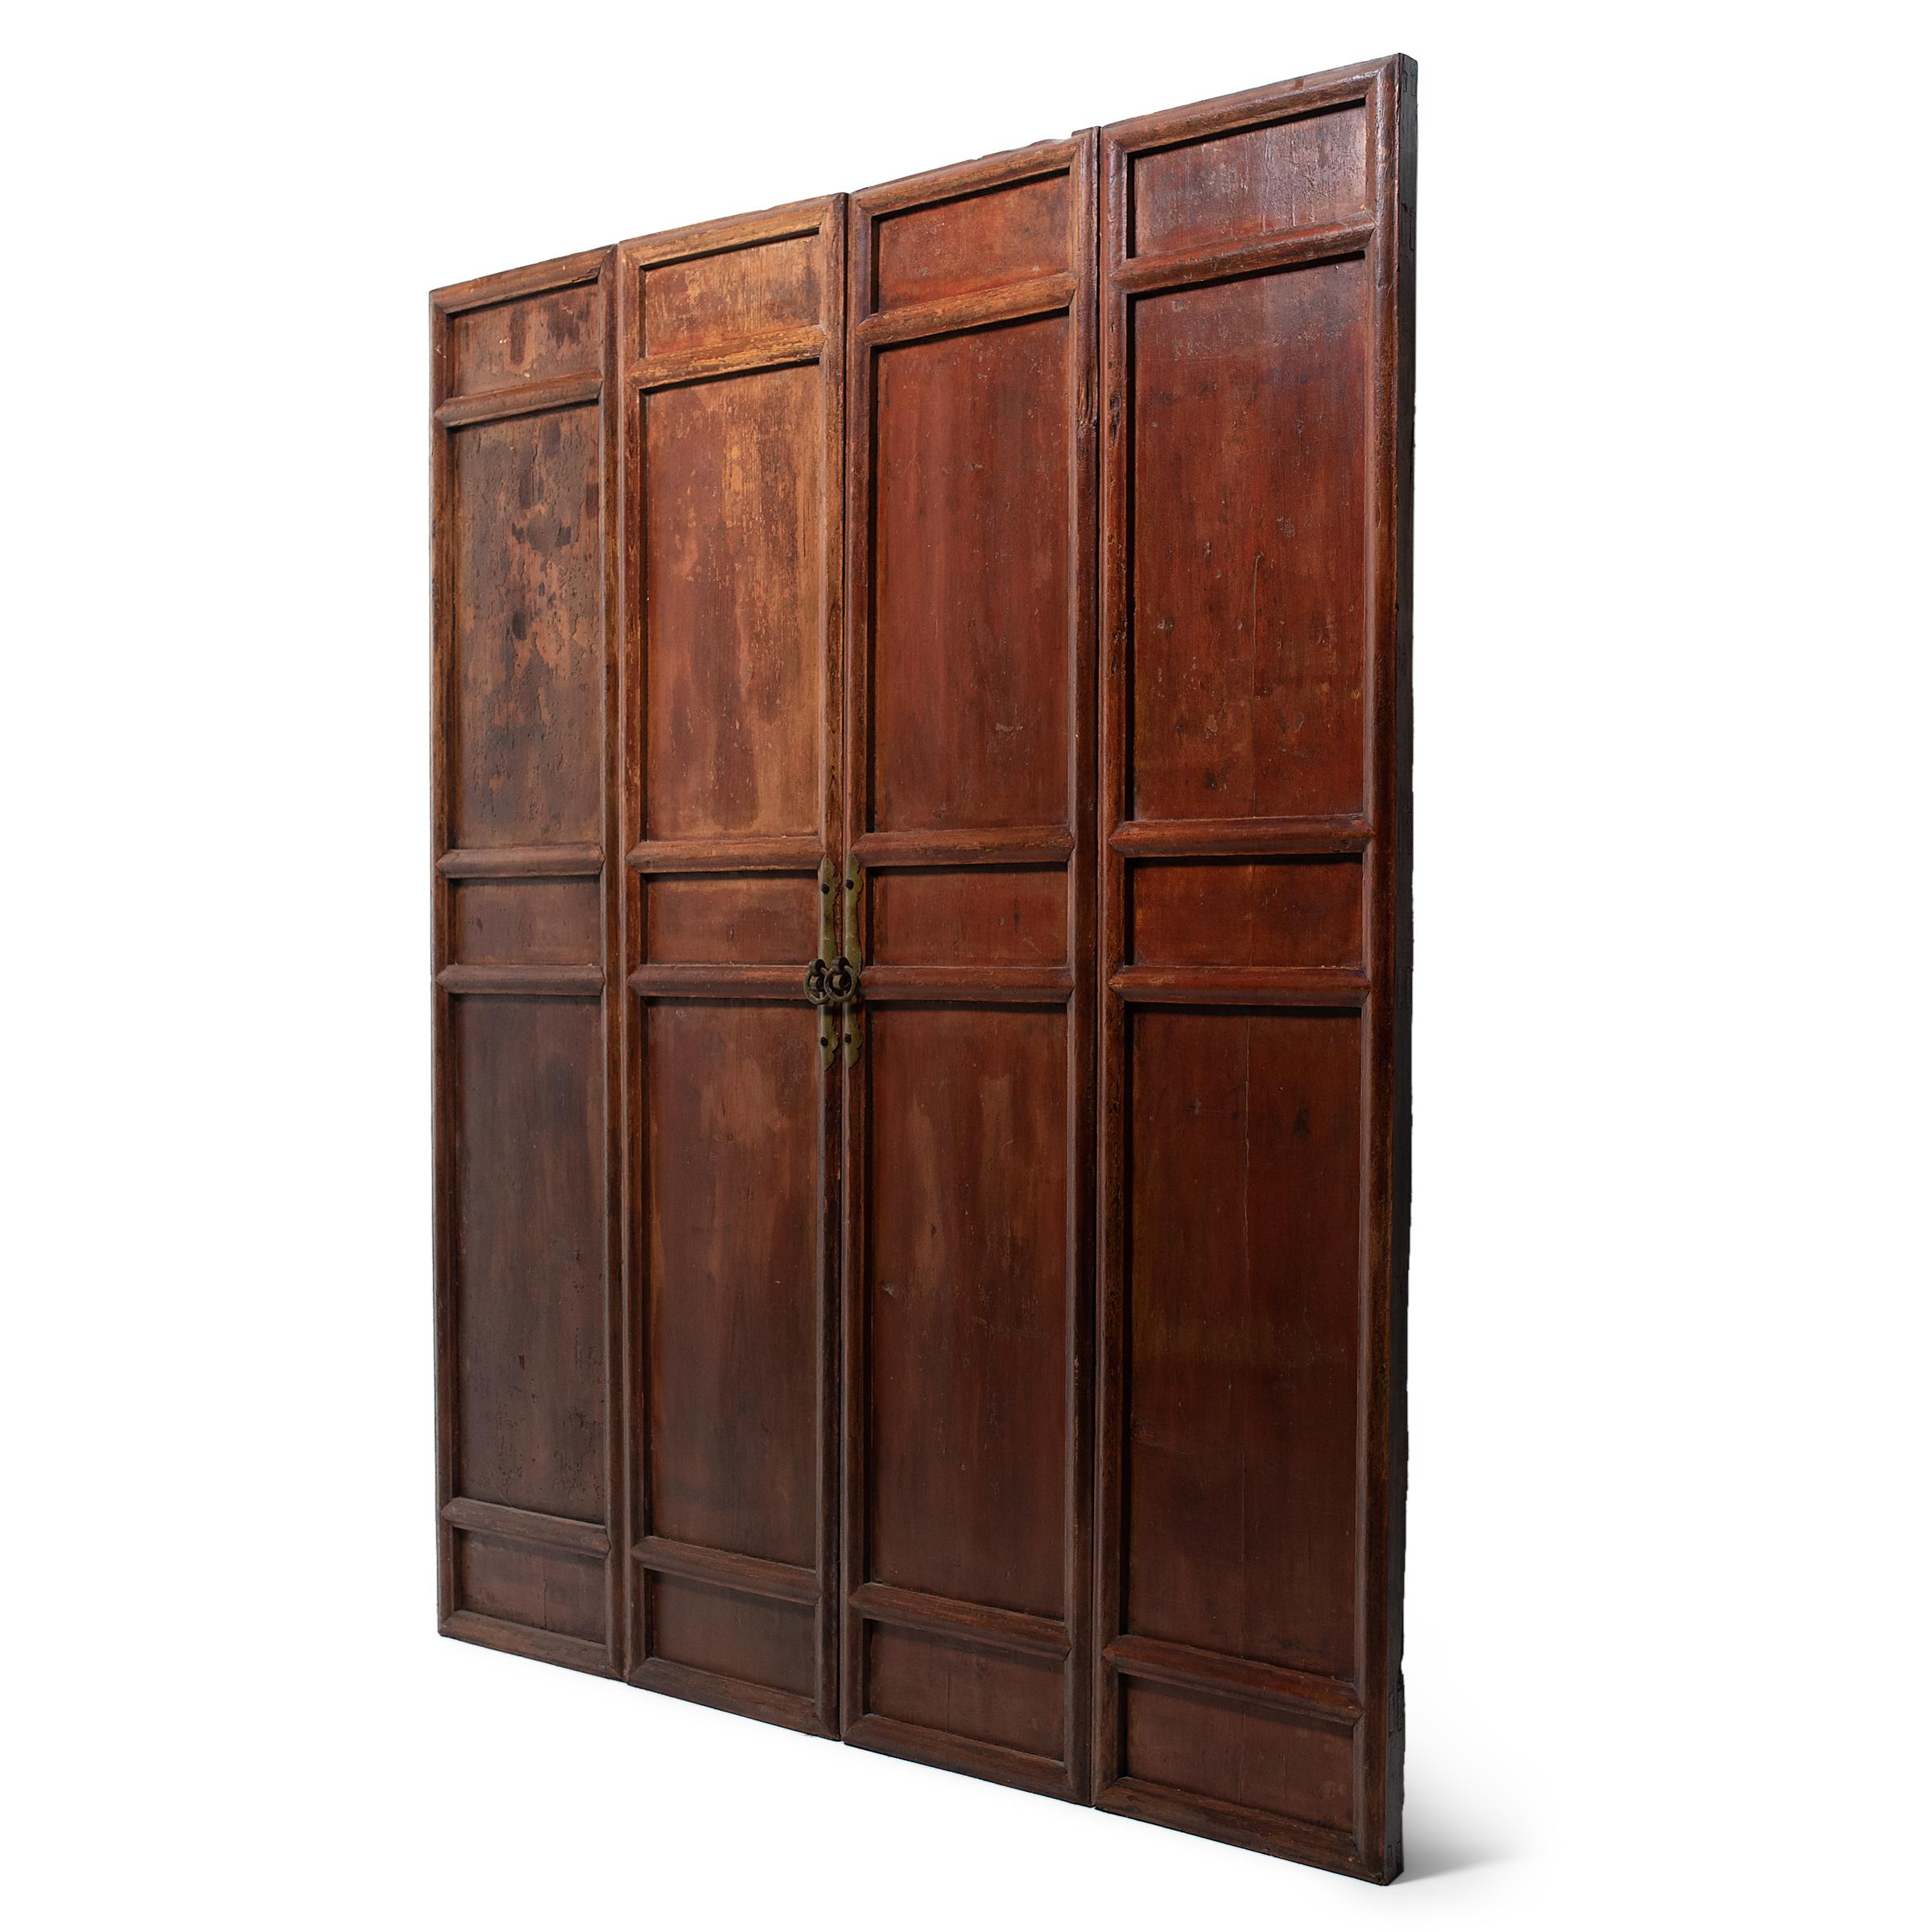 A hallmark of Chinese architecture, tall door panels such as these were used in provincial courtyard homes to easily open up a room to the outdoors. Designed with solid wood panels instead of lattice windows, these door panels were likely installed